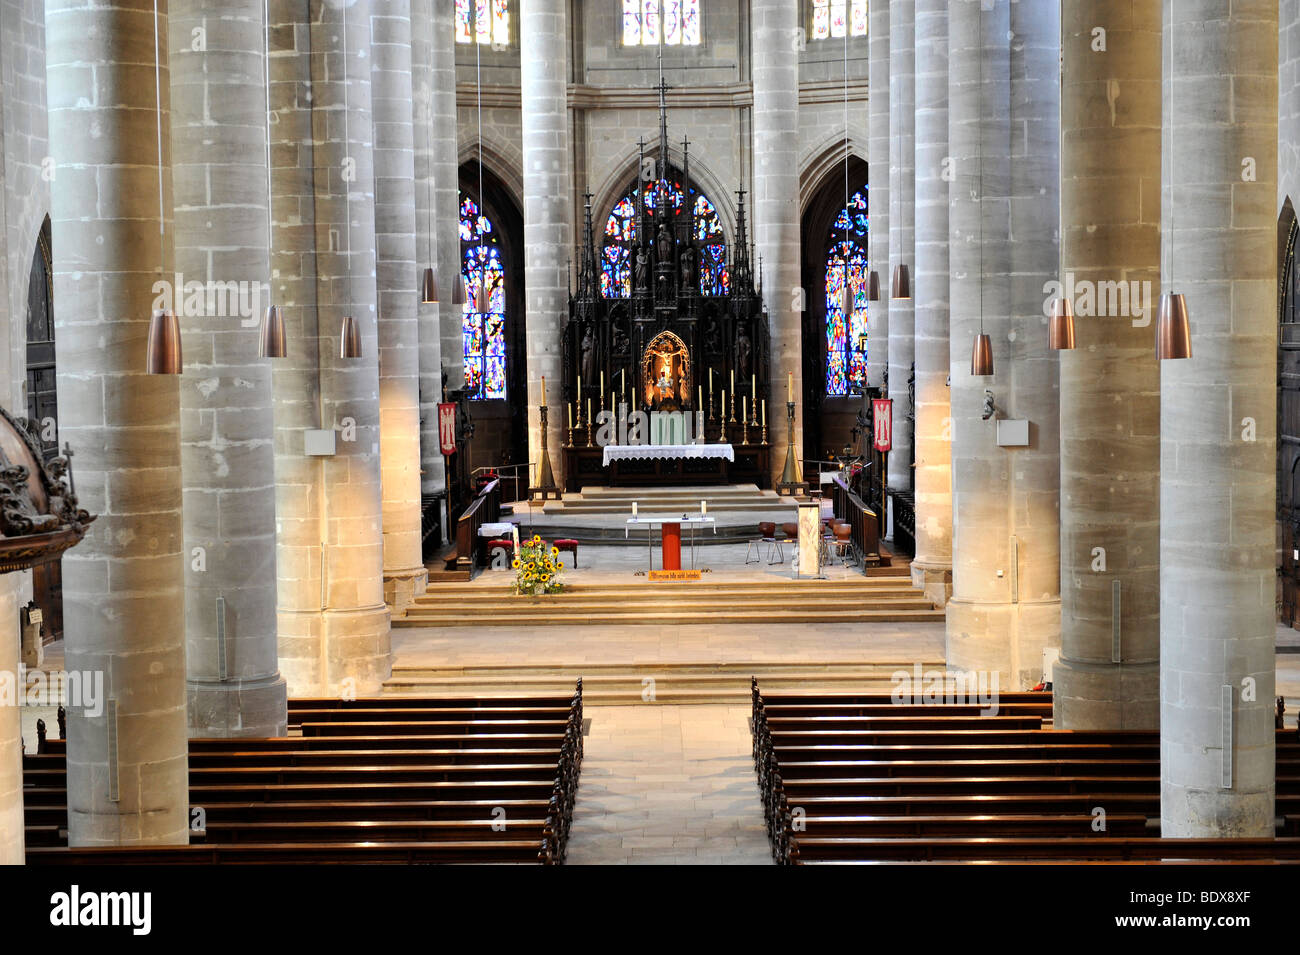 Interior of nave and neogothic high altar in the choir room with apse chapels, Heilig-Kreuz-Muenster Holy Cross cathedral, Sout Stock Photo